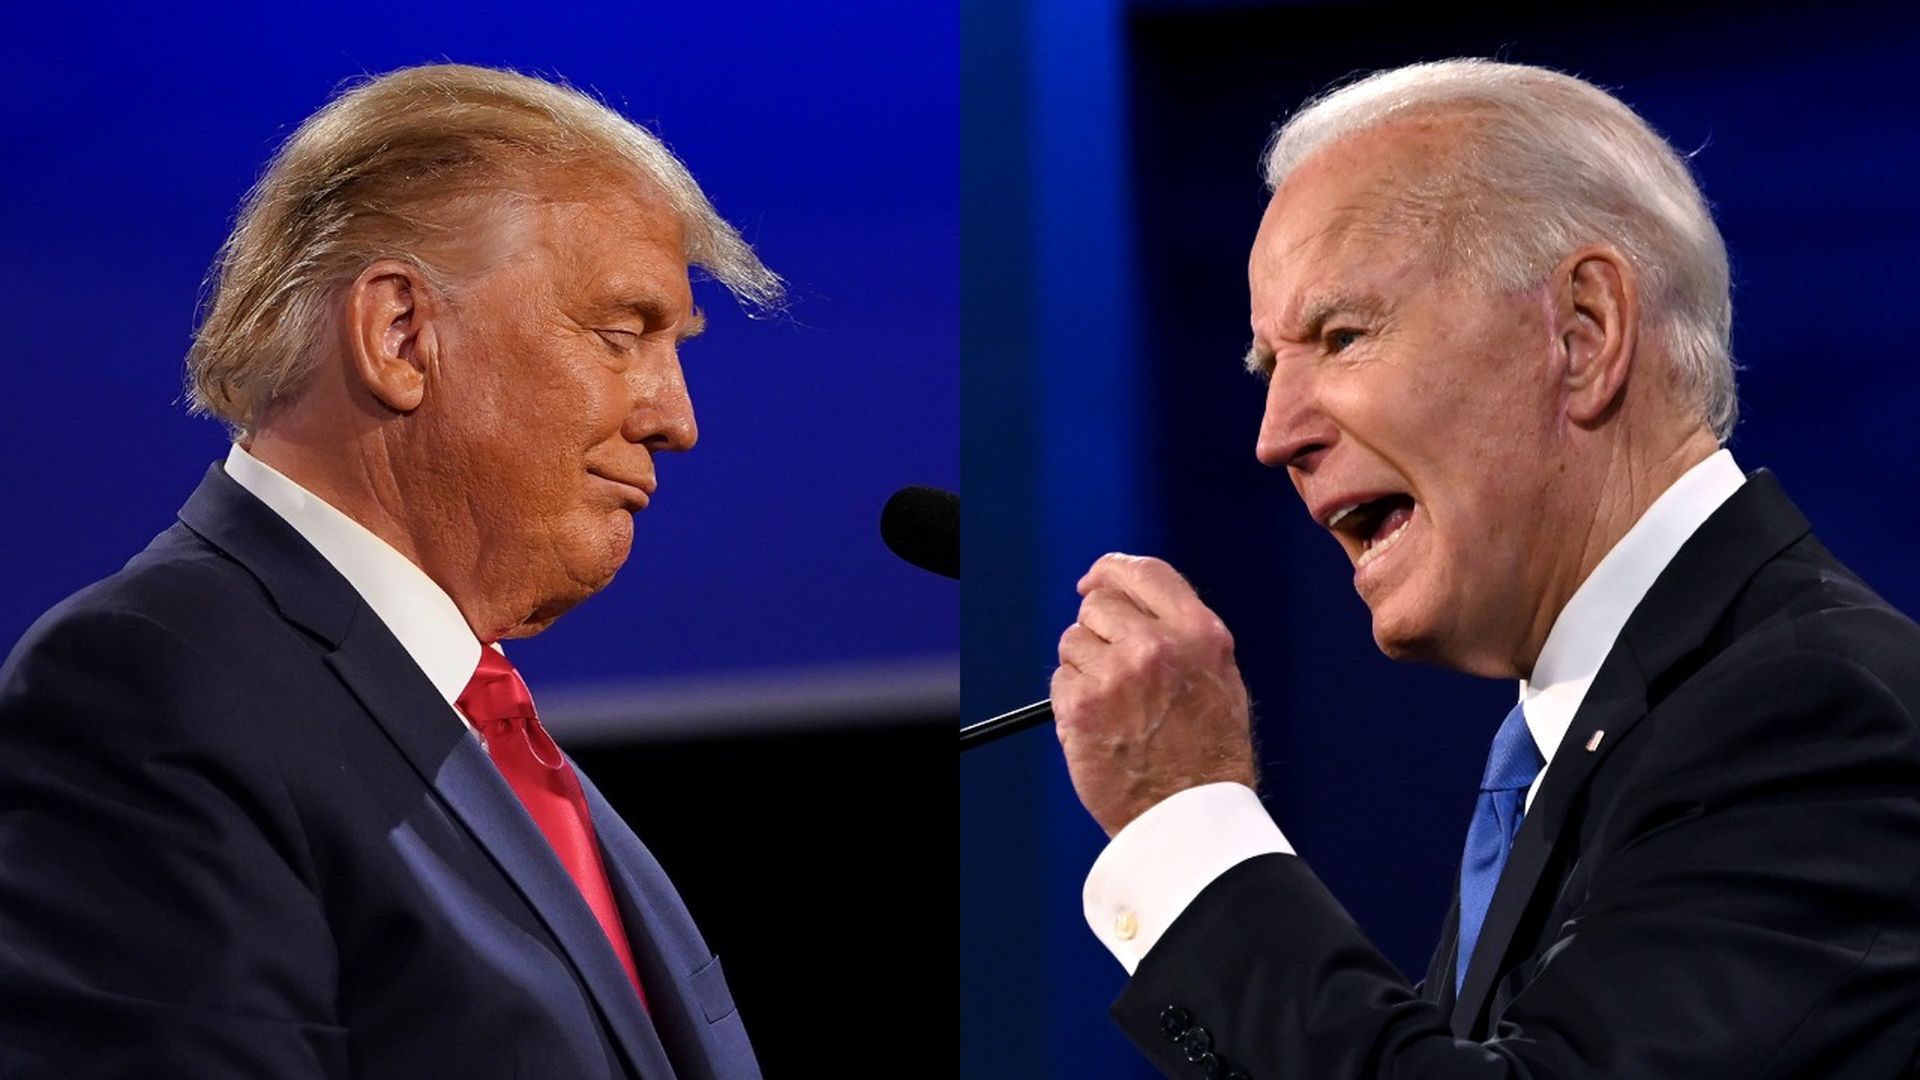 Amidst legal troubles, Donald Trump gains ground on Joe Biden in the polls